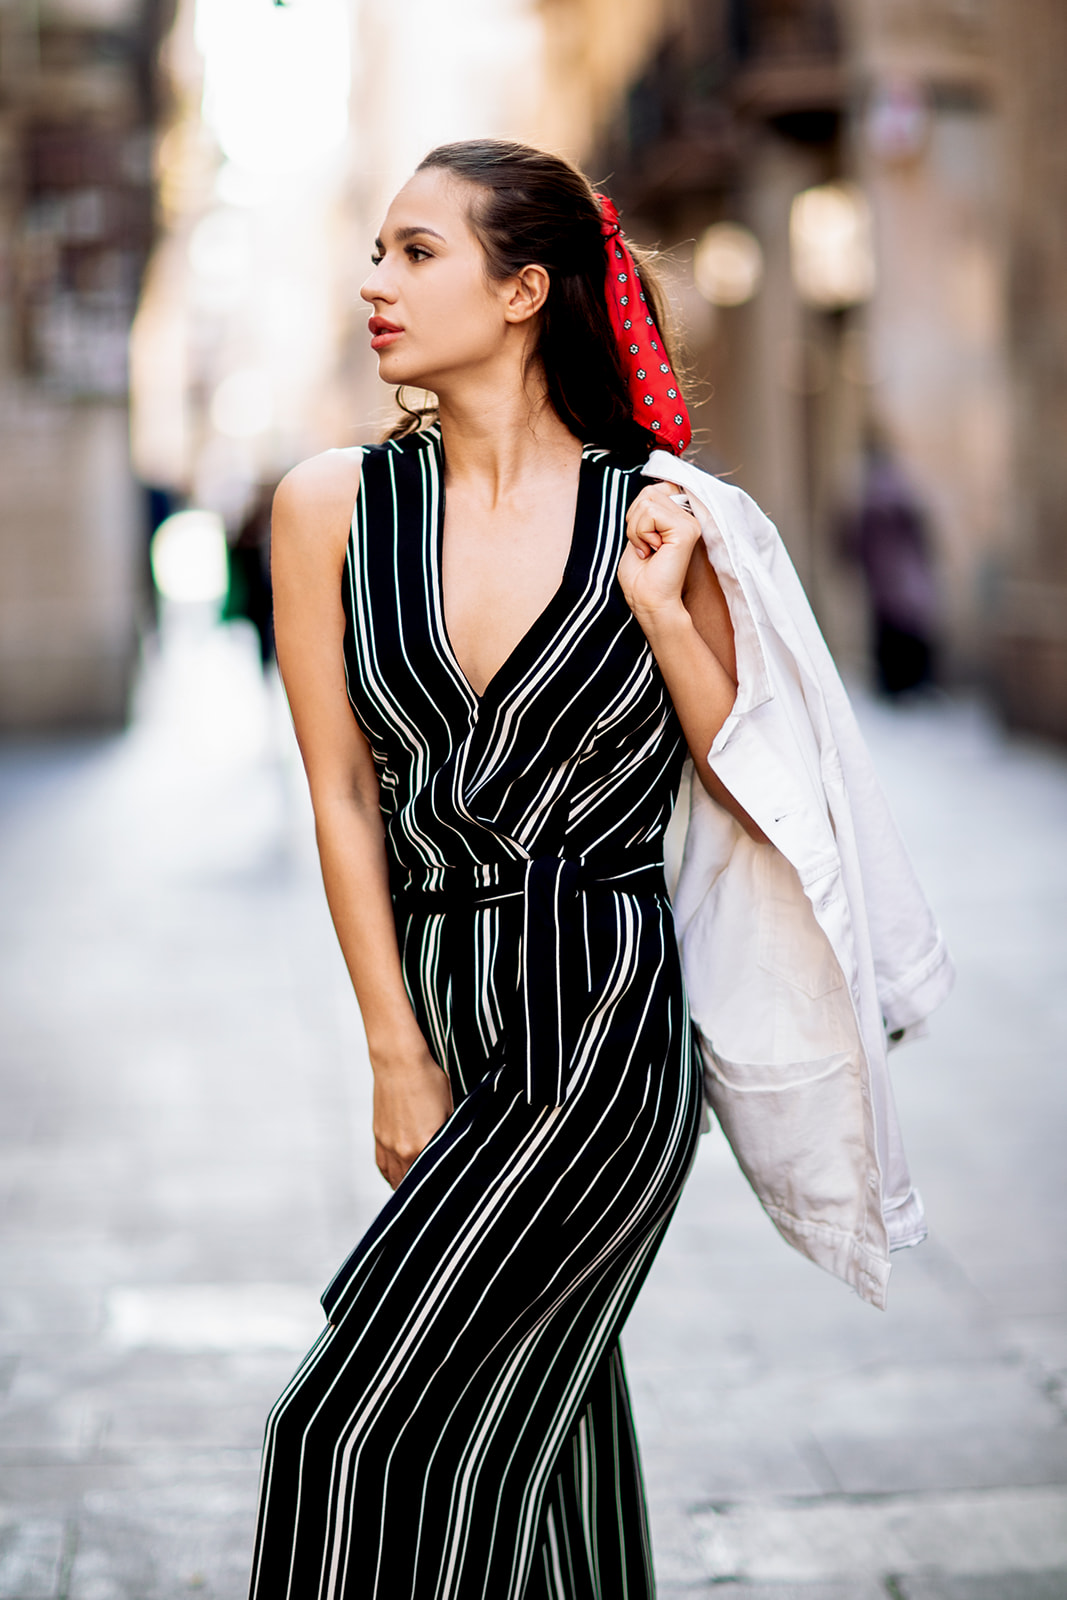 Barcelona Portrait Session in the Gothic Quarter - Image Property of www.j-dphoto.com